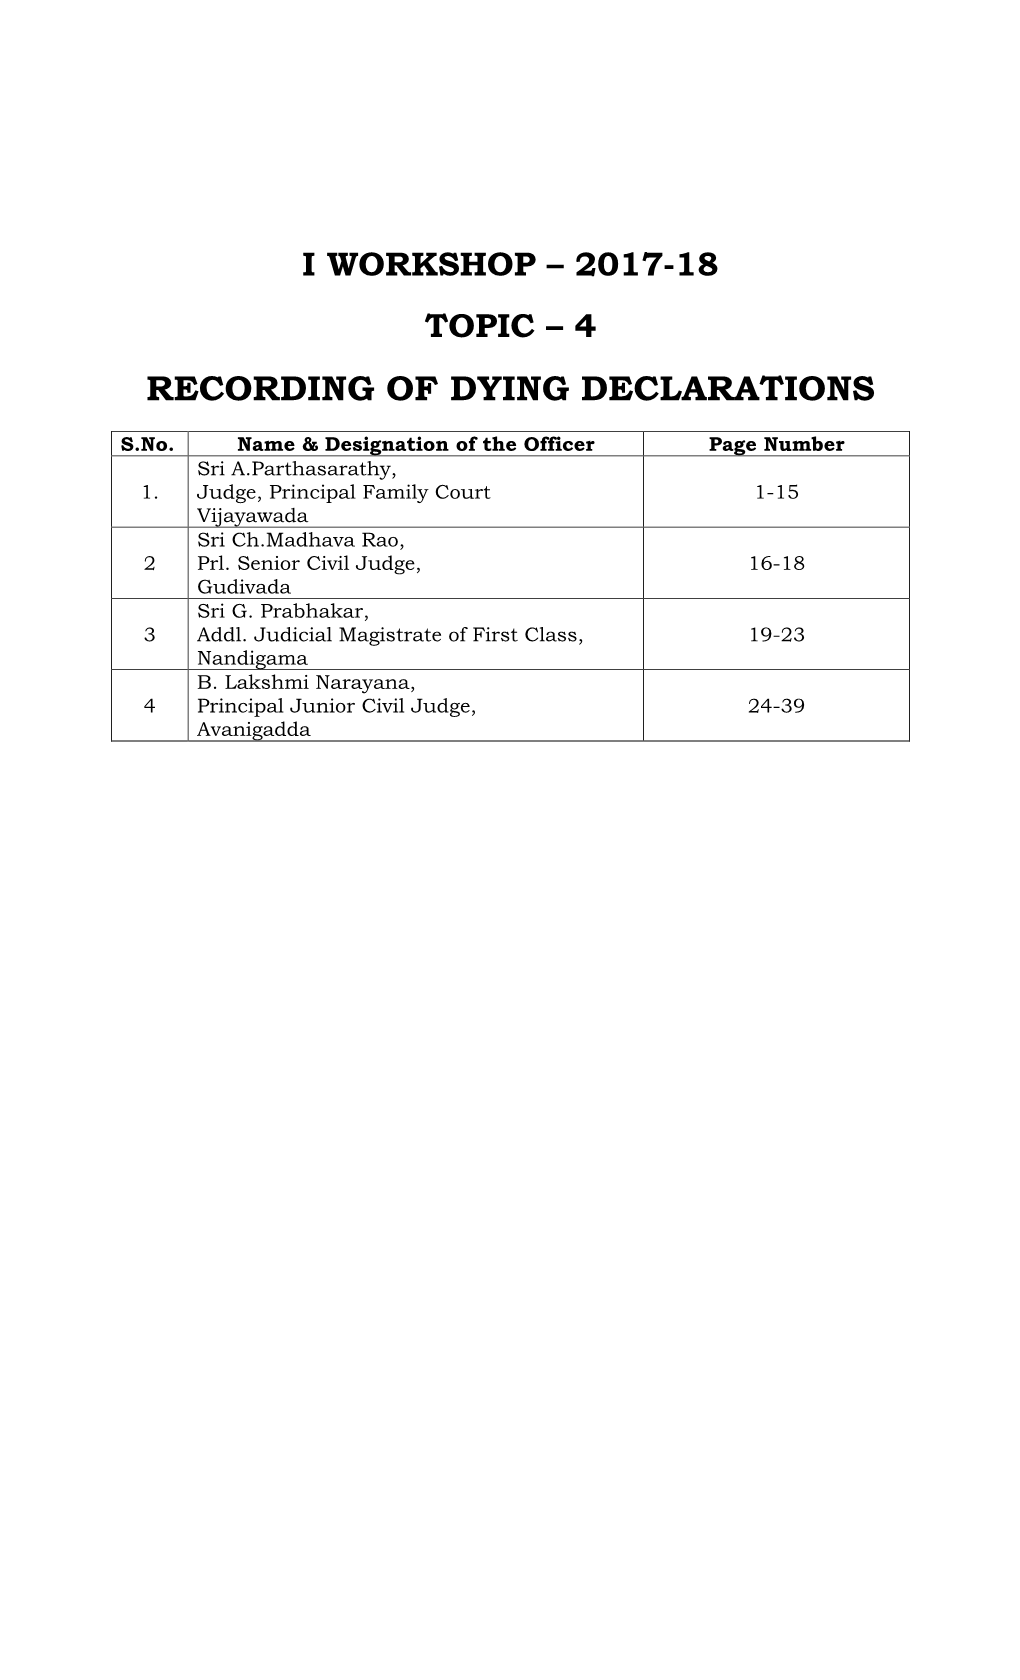 Recording of Dying Declarations